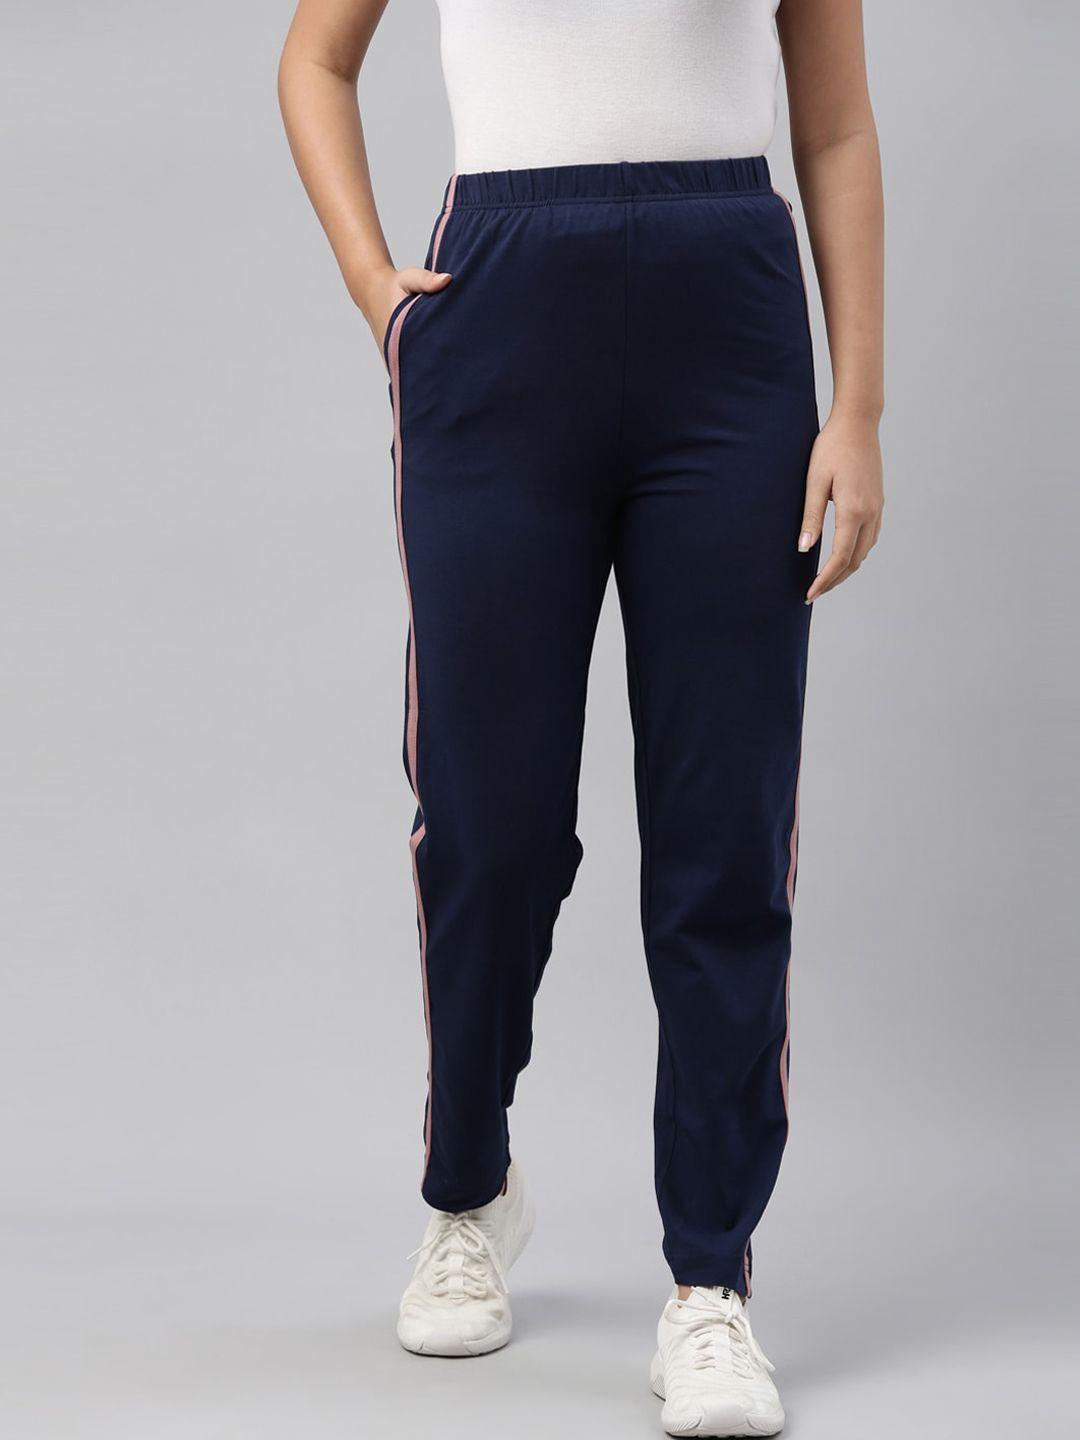 go-colors-women-navy-blue-solid-relaxed-fit-track-pants